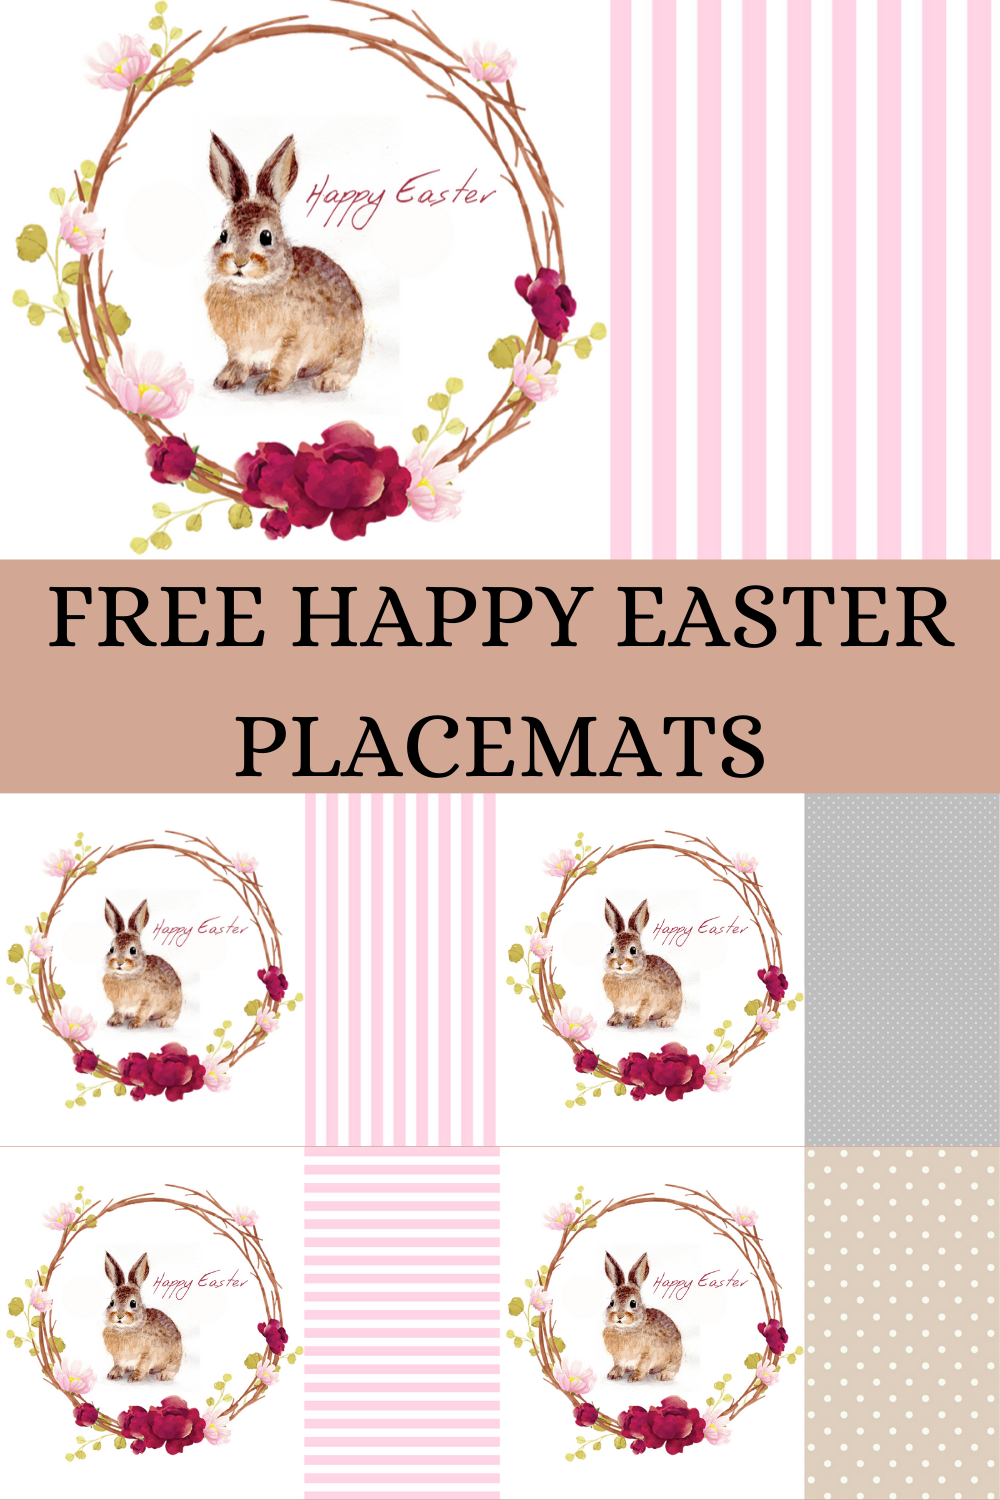 Free Easter Printable Placemats Home Chic Club Free Easter Printable 